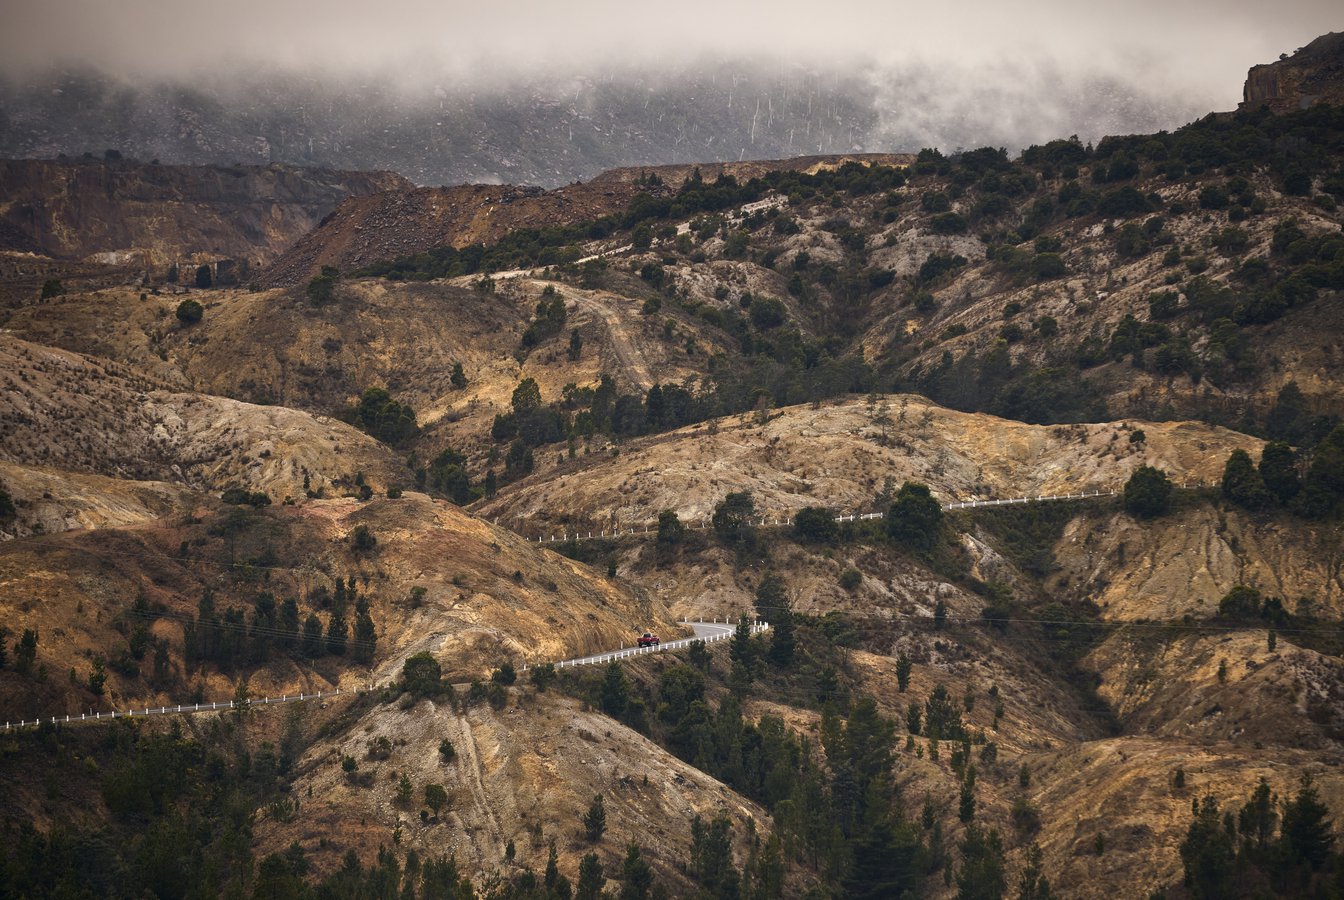 A photo of the hills surrounding Queenstown, lutruwita/Tasmania. Rocky orange hills are dotted with trees, with a grey road winding through the hills. Image by Rémi Chauvin.